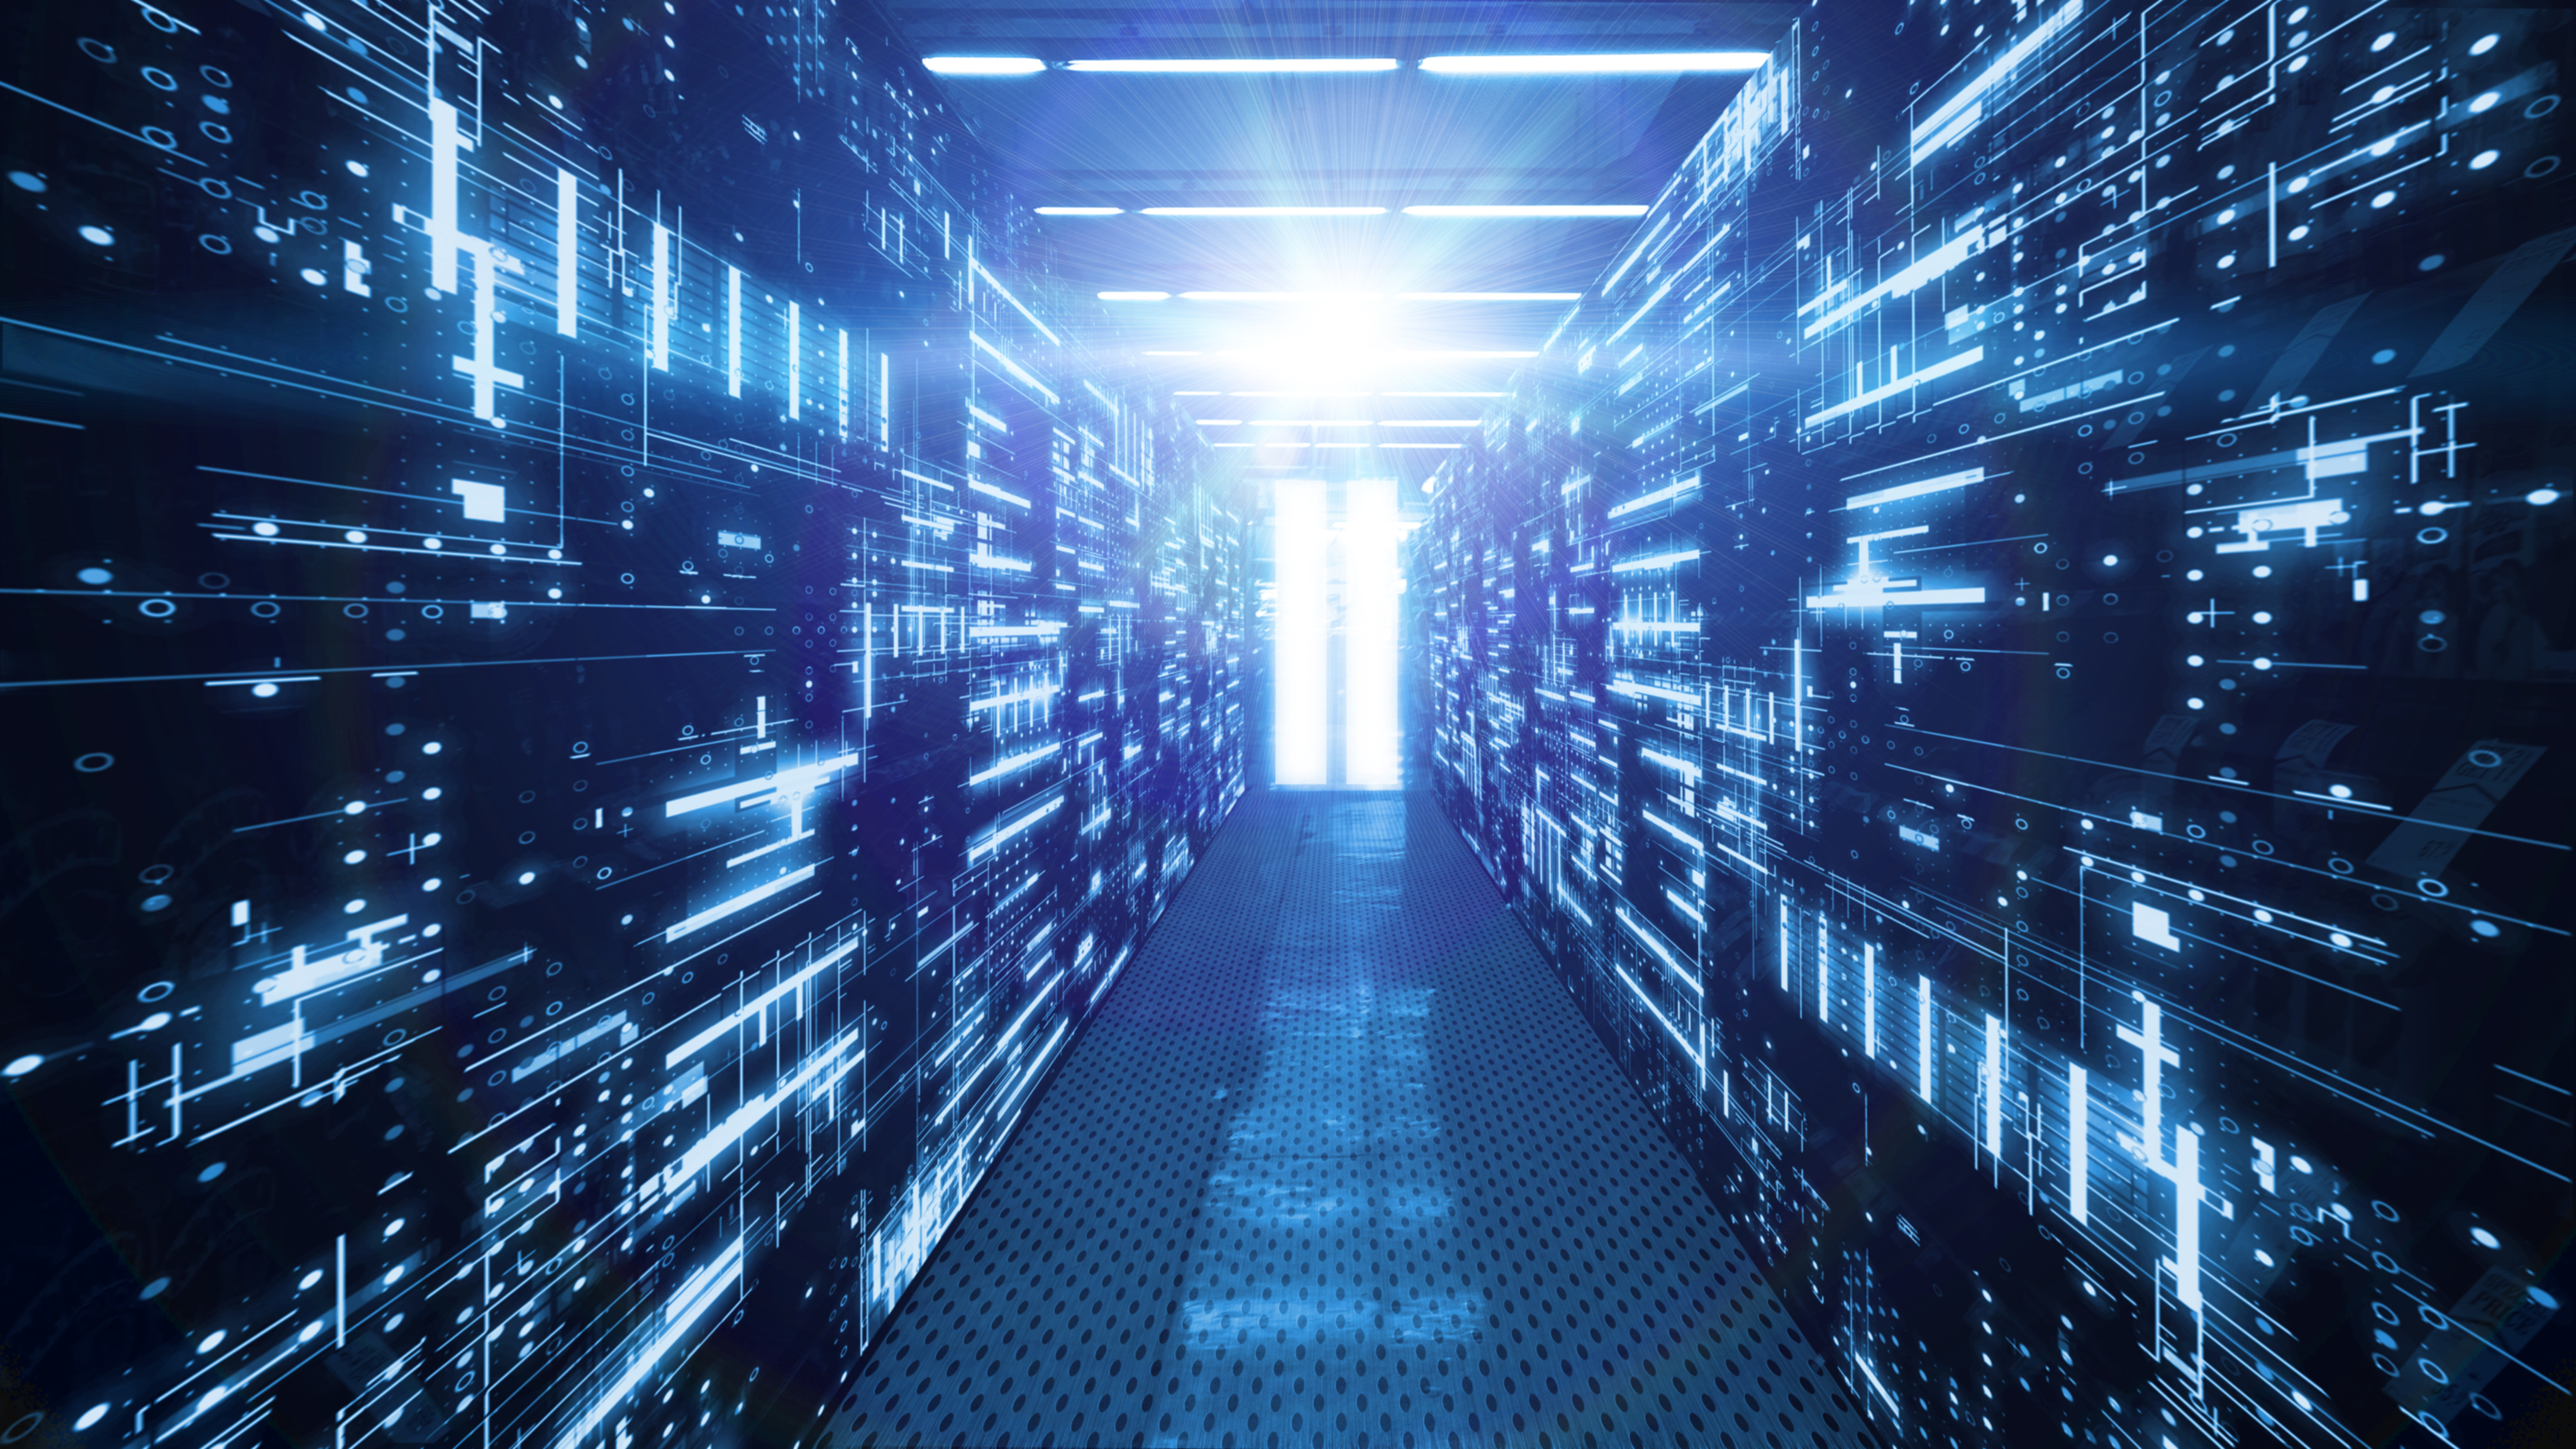 3D Rendering of data center room with abstract data servers and glowing led indicators, abstract network and ceiling lights. For Big data, machine learning, artificial intelligence concept background.